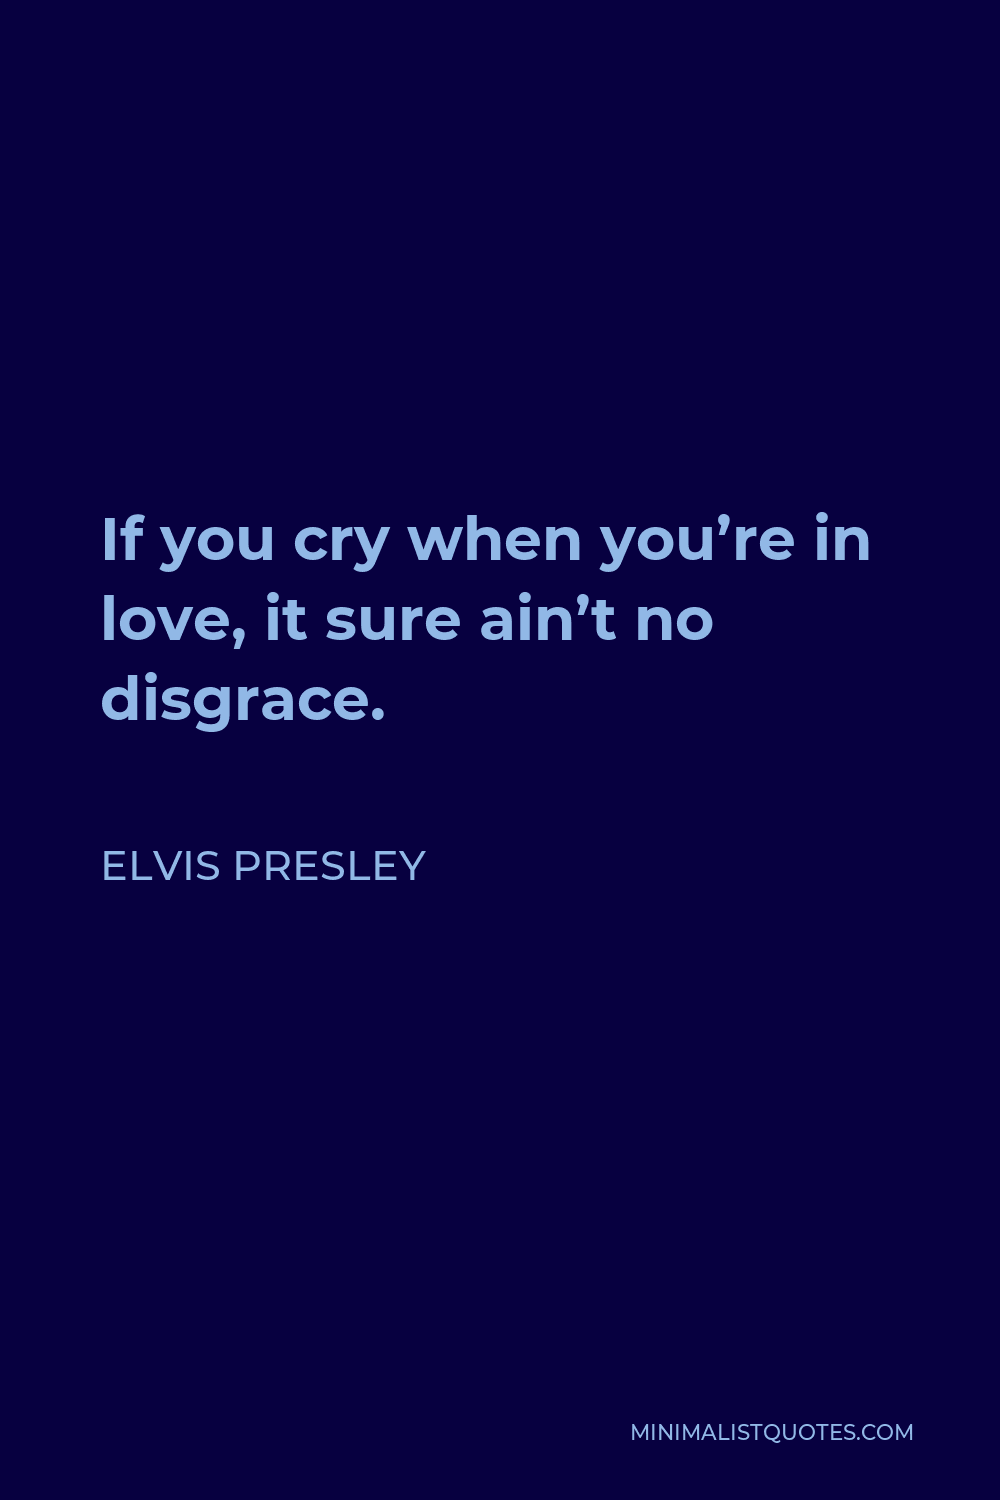 Elvis Presley Quote - If you cry when you’re in love, it sure ain’t no disgrace.